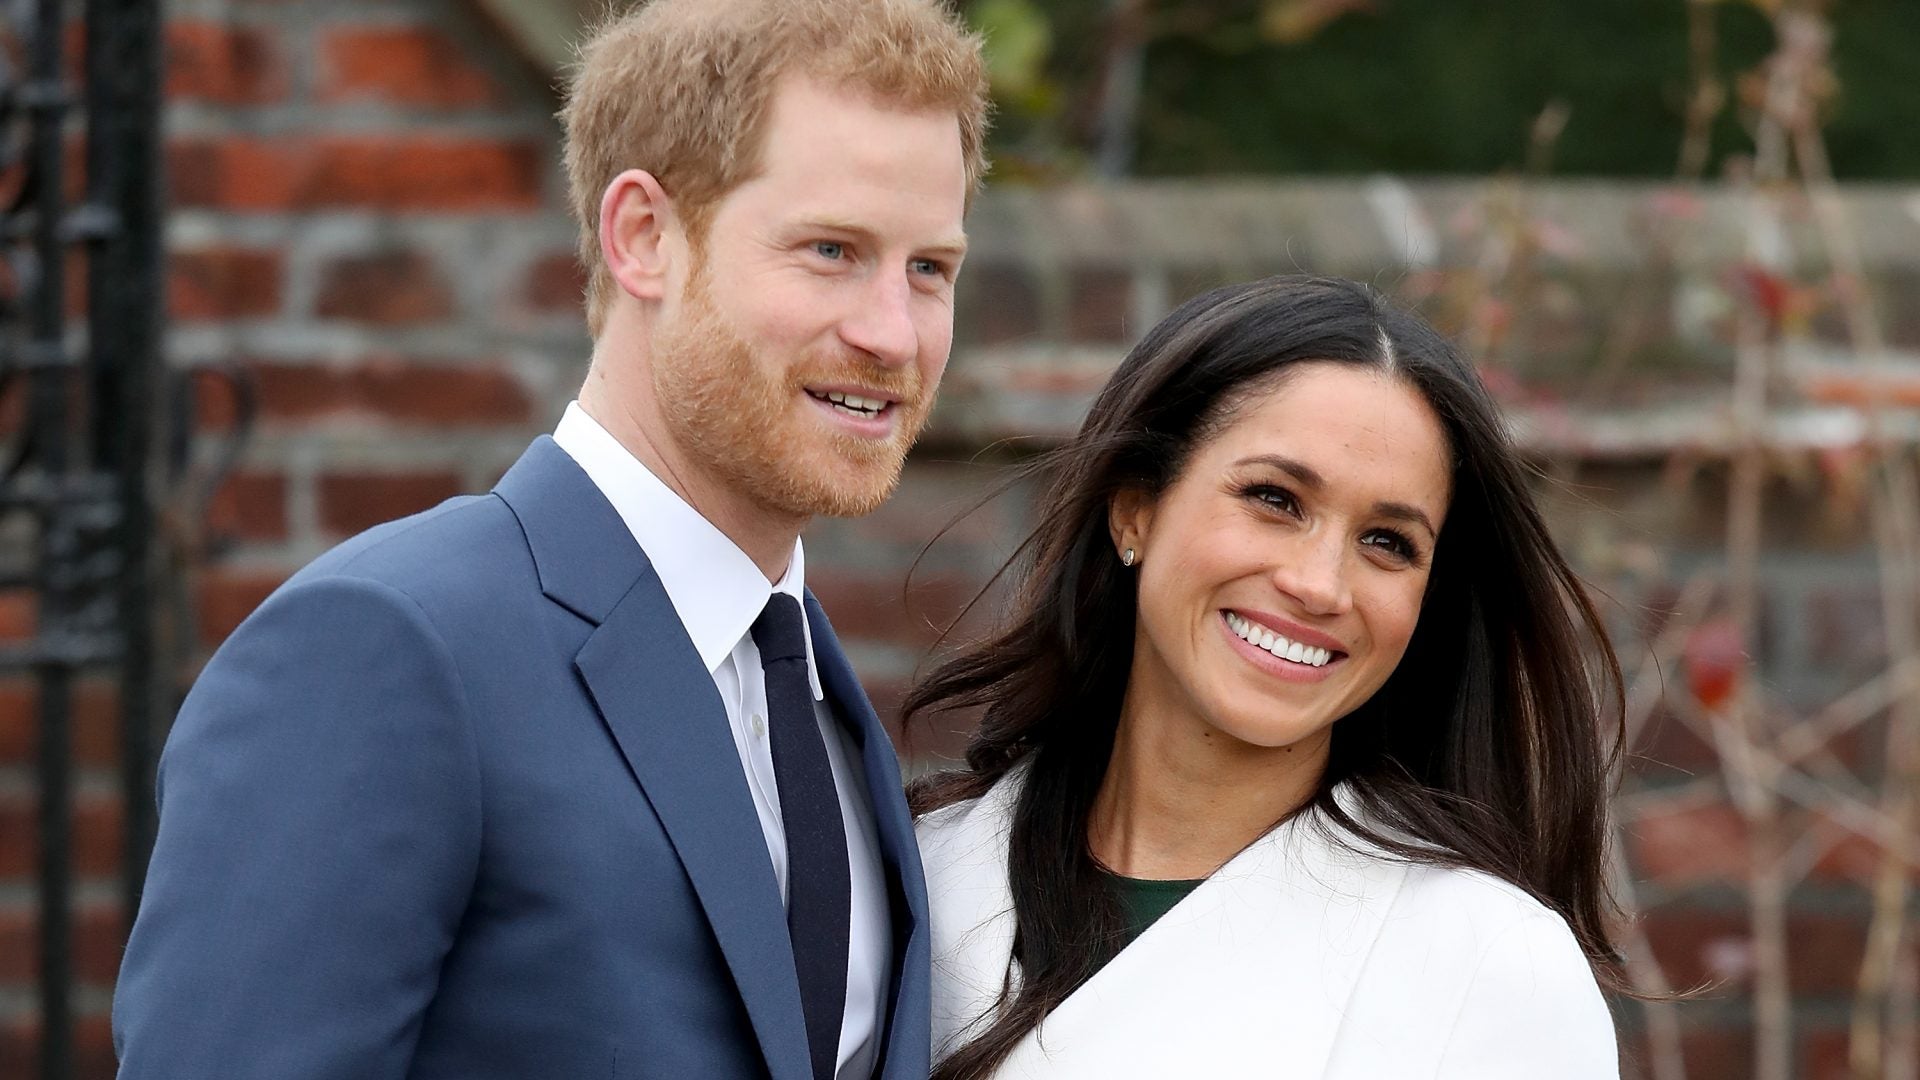 After A Trying Year, Meghan Markle and Prince Harry Will Step Back From Royal Duties